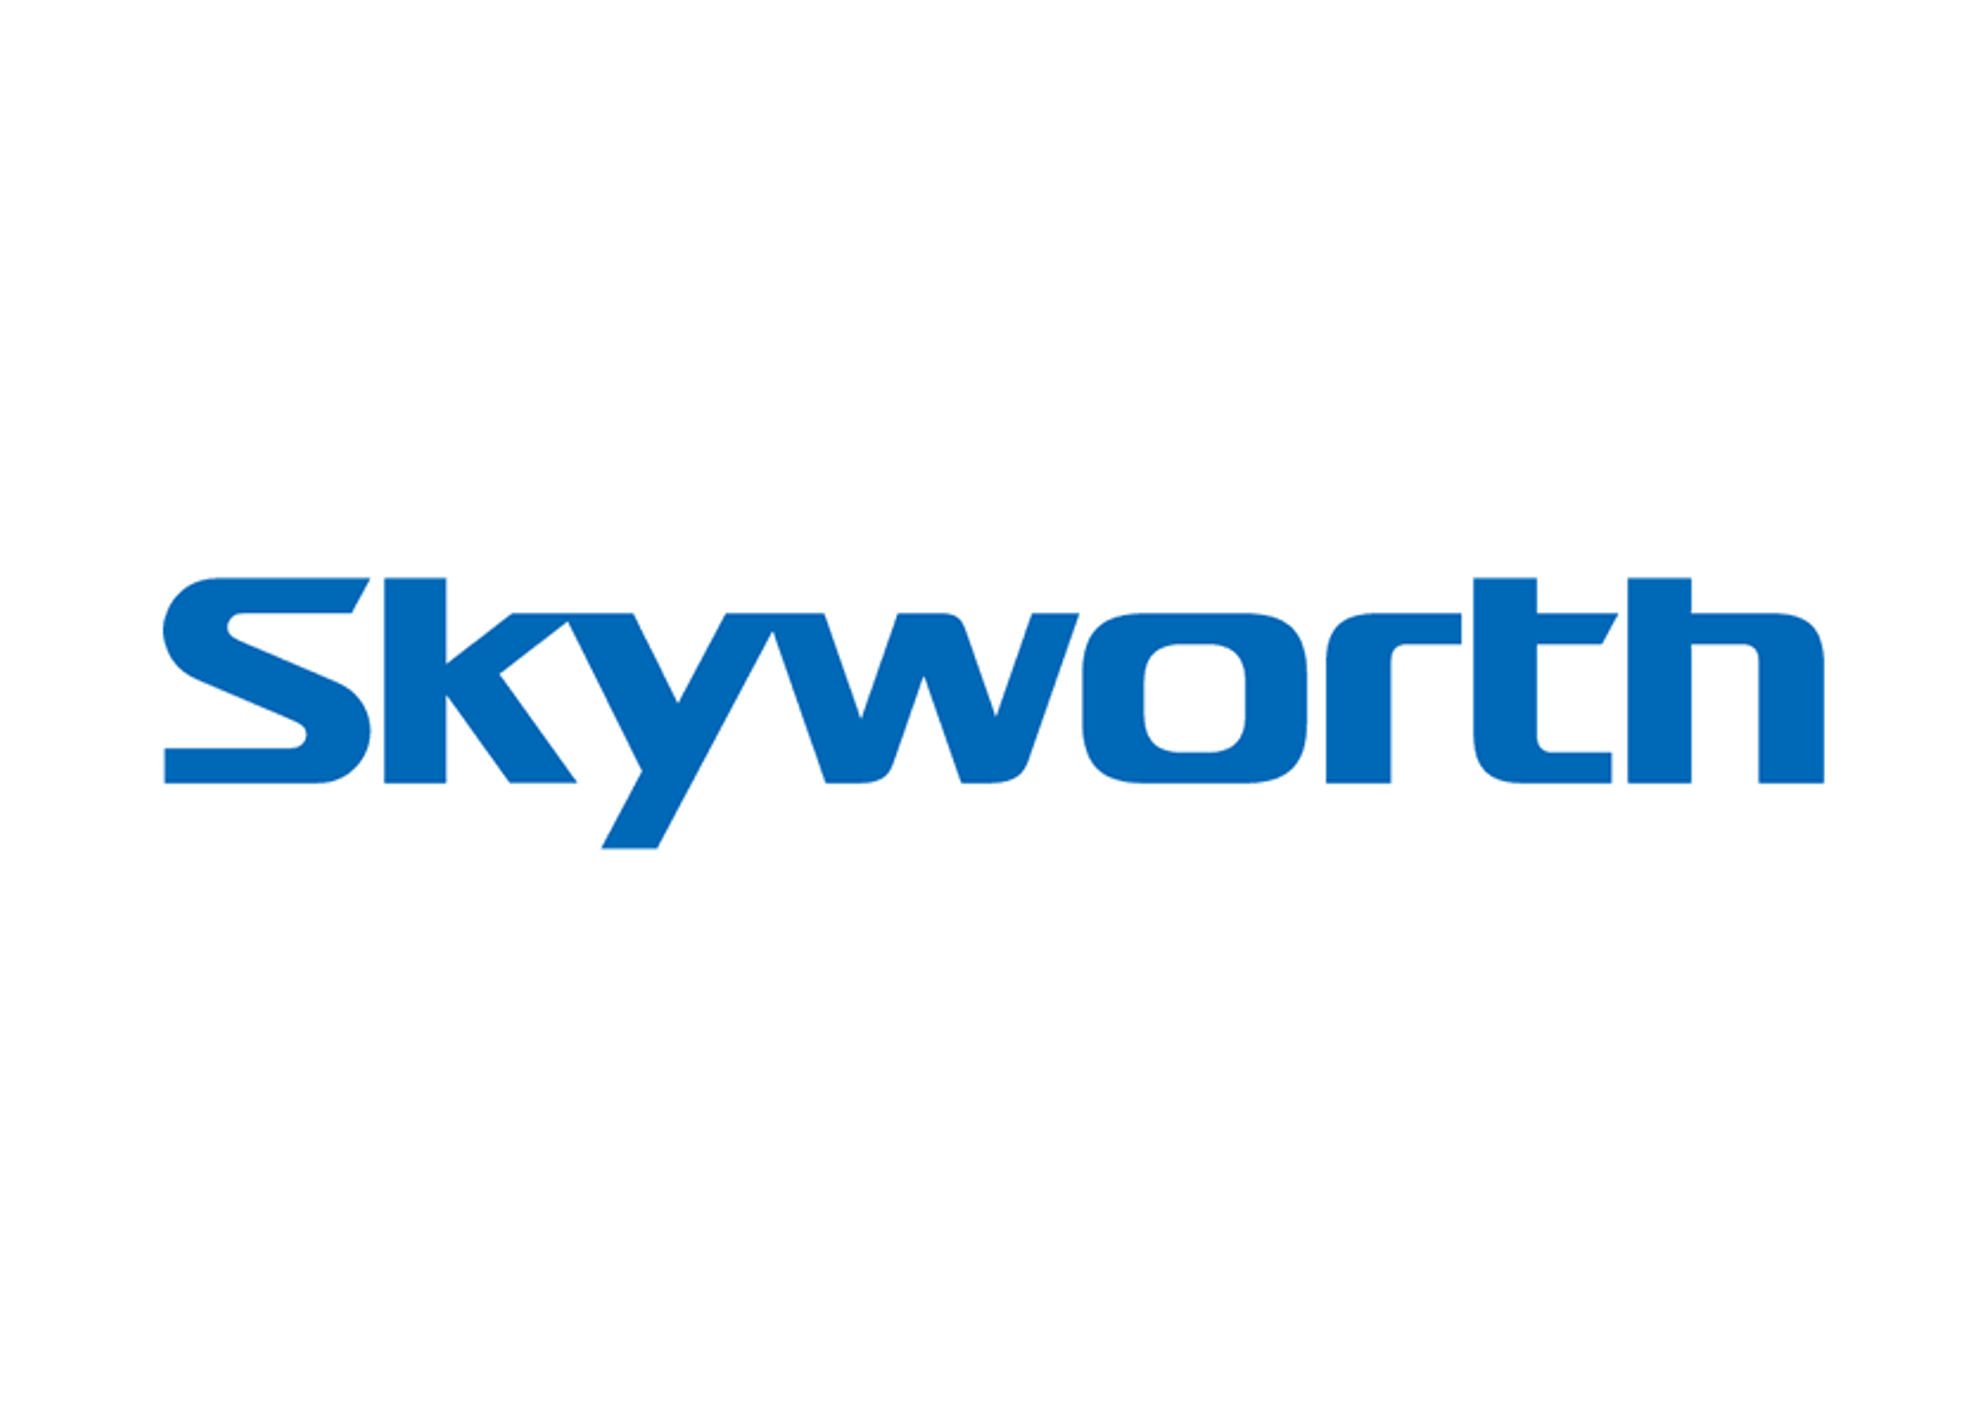 Skyworth Signs Worldwide License to Via Licensing’s Advanced Audio Coding Patent Pool